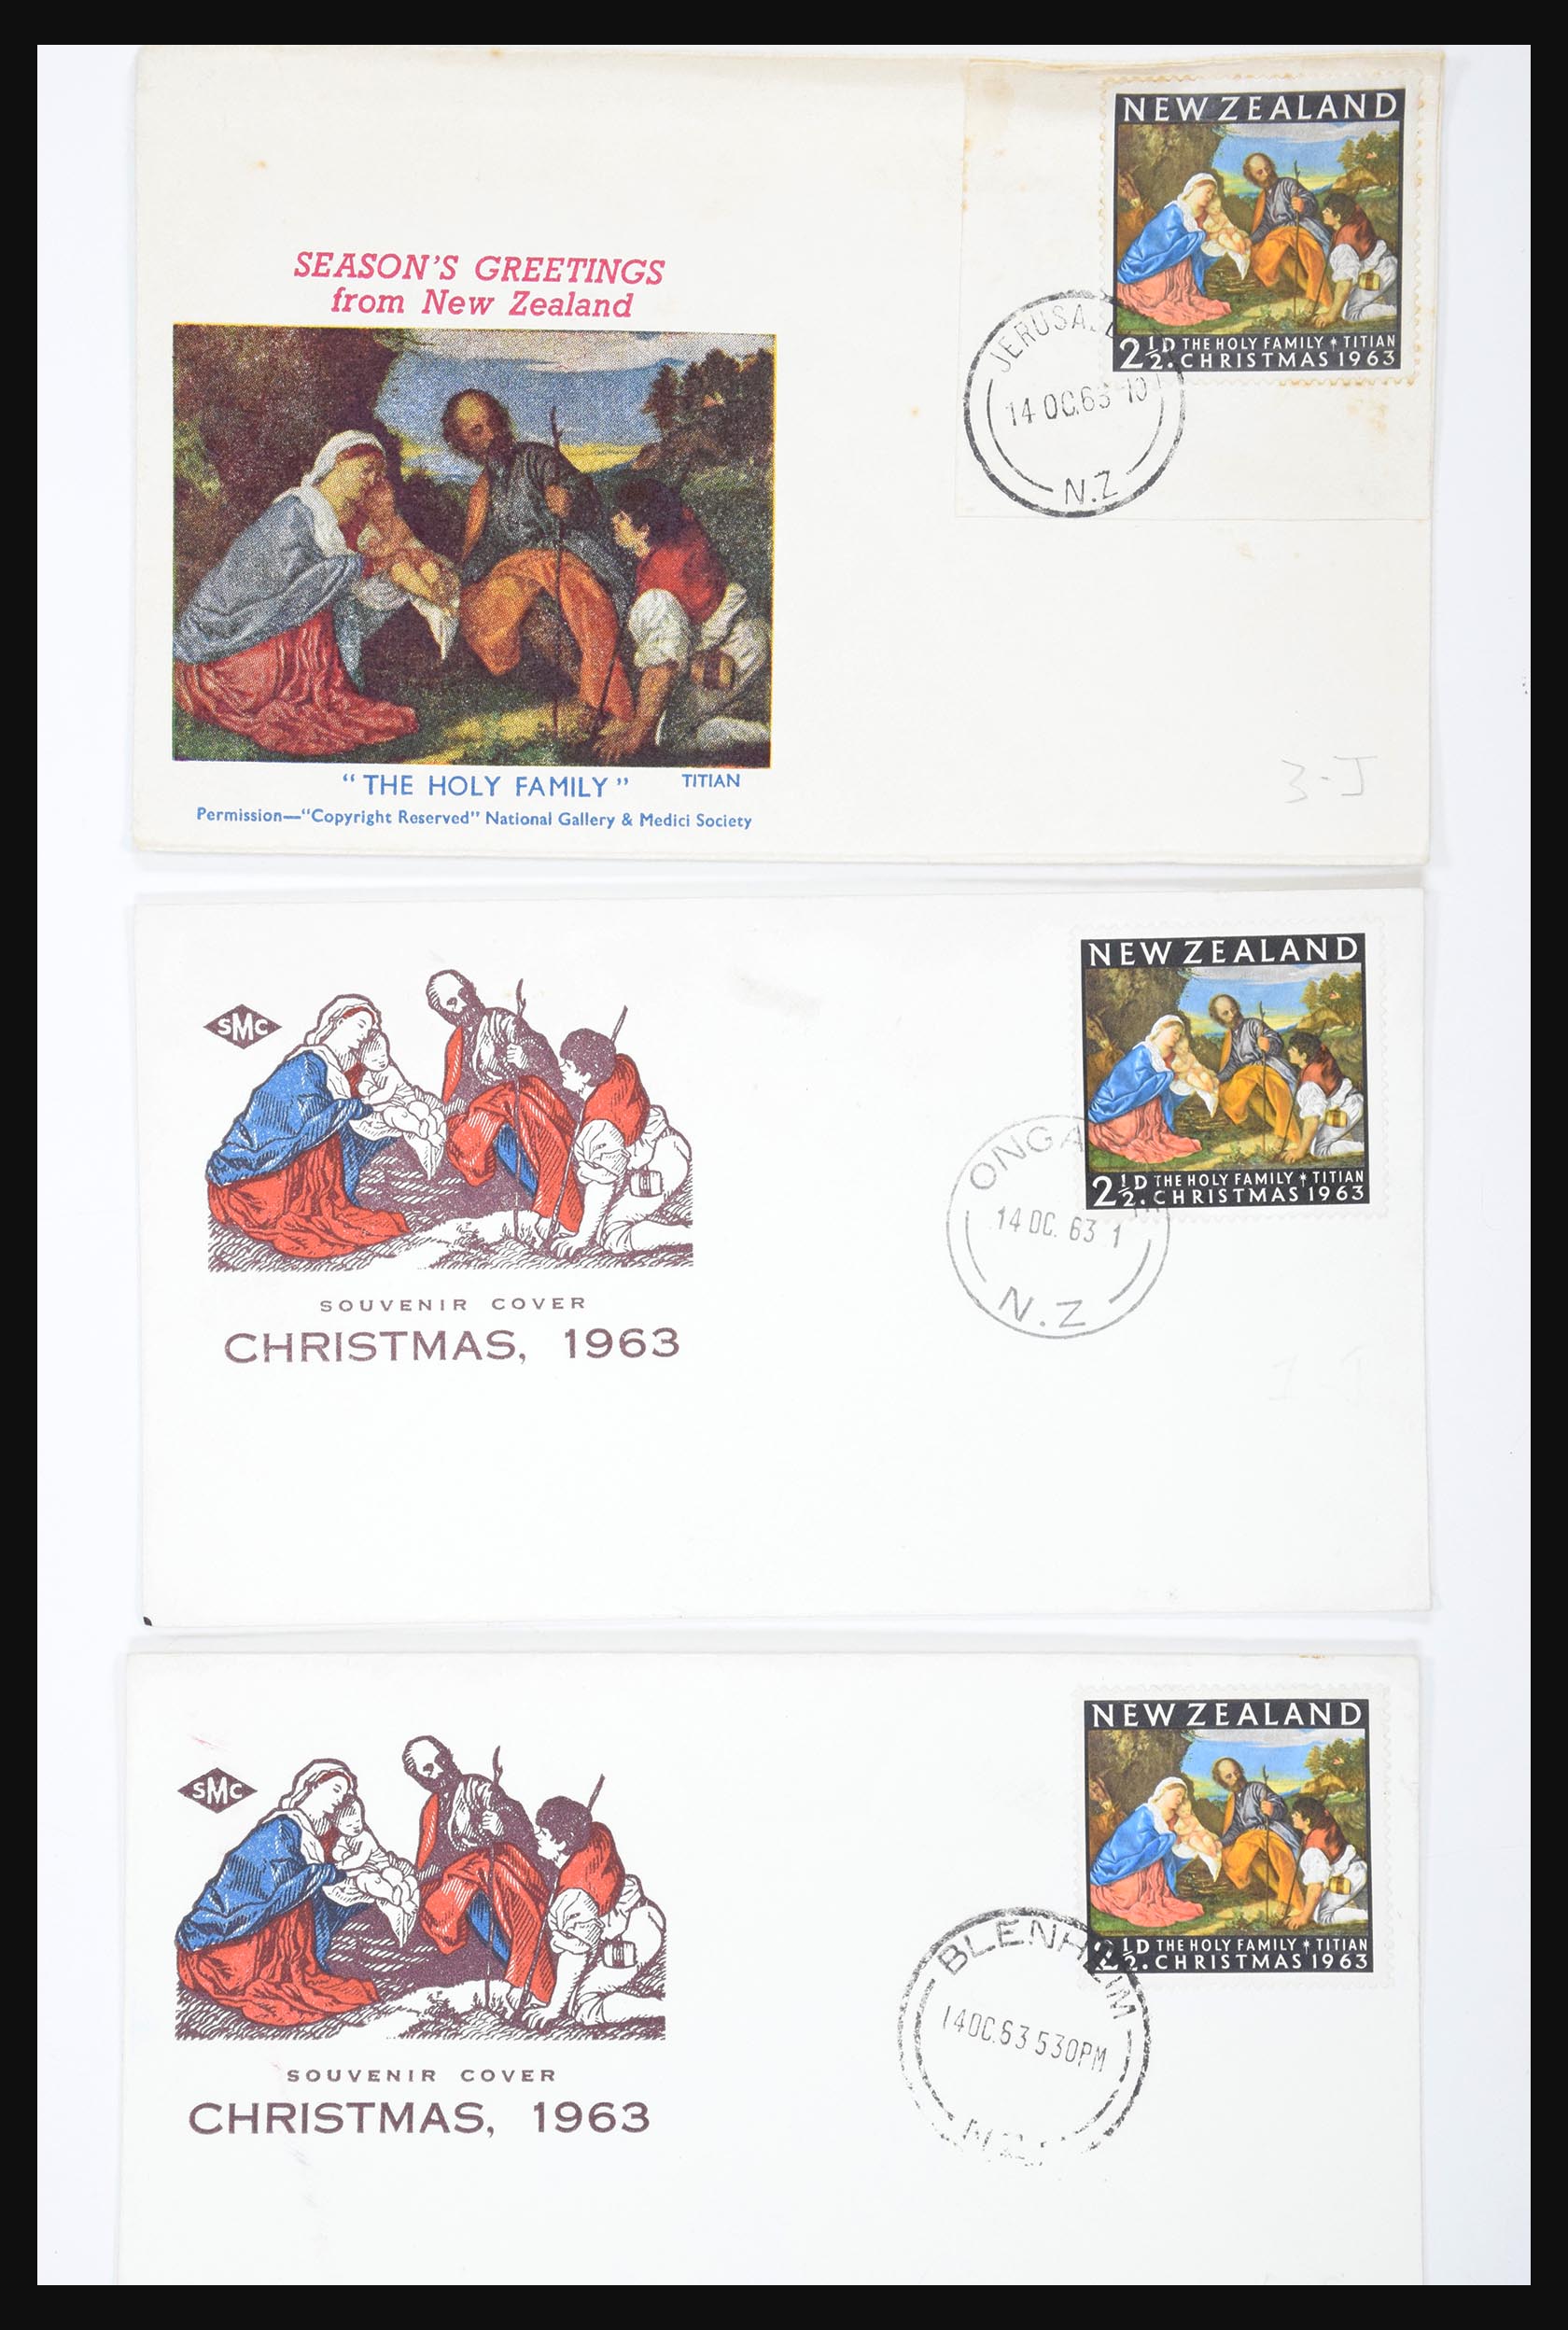 30821 053 - 30821 New Zealand FDC's 1960-1971.